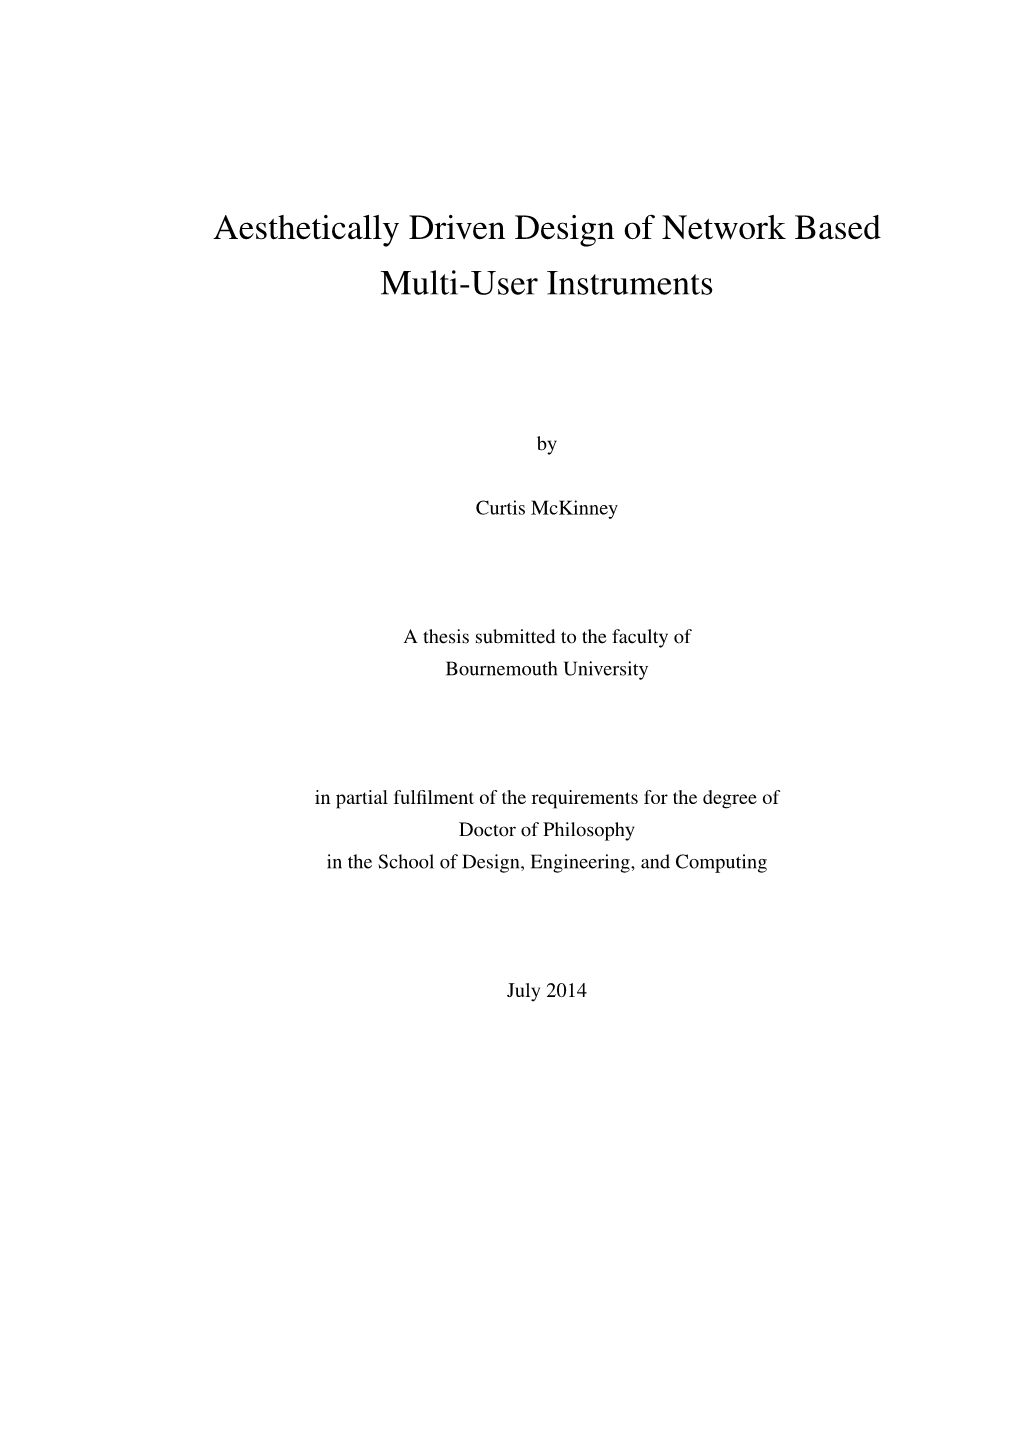 Aesthetically Driven Design of Network Based Multi-User Instruments